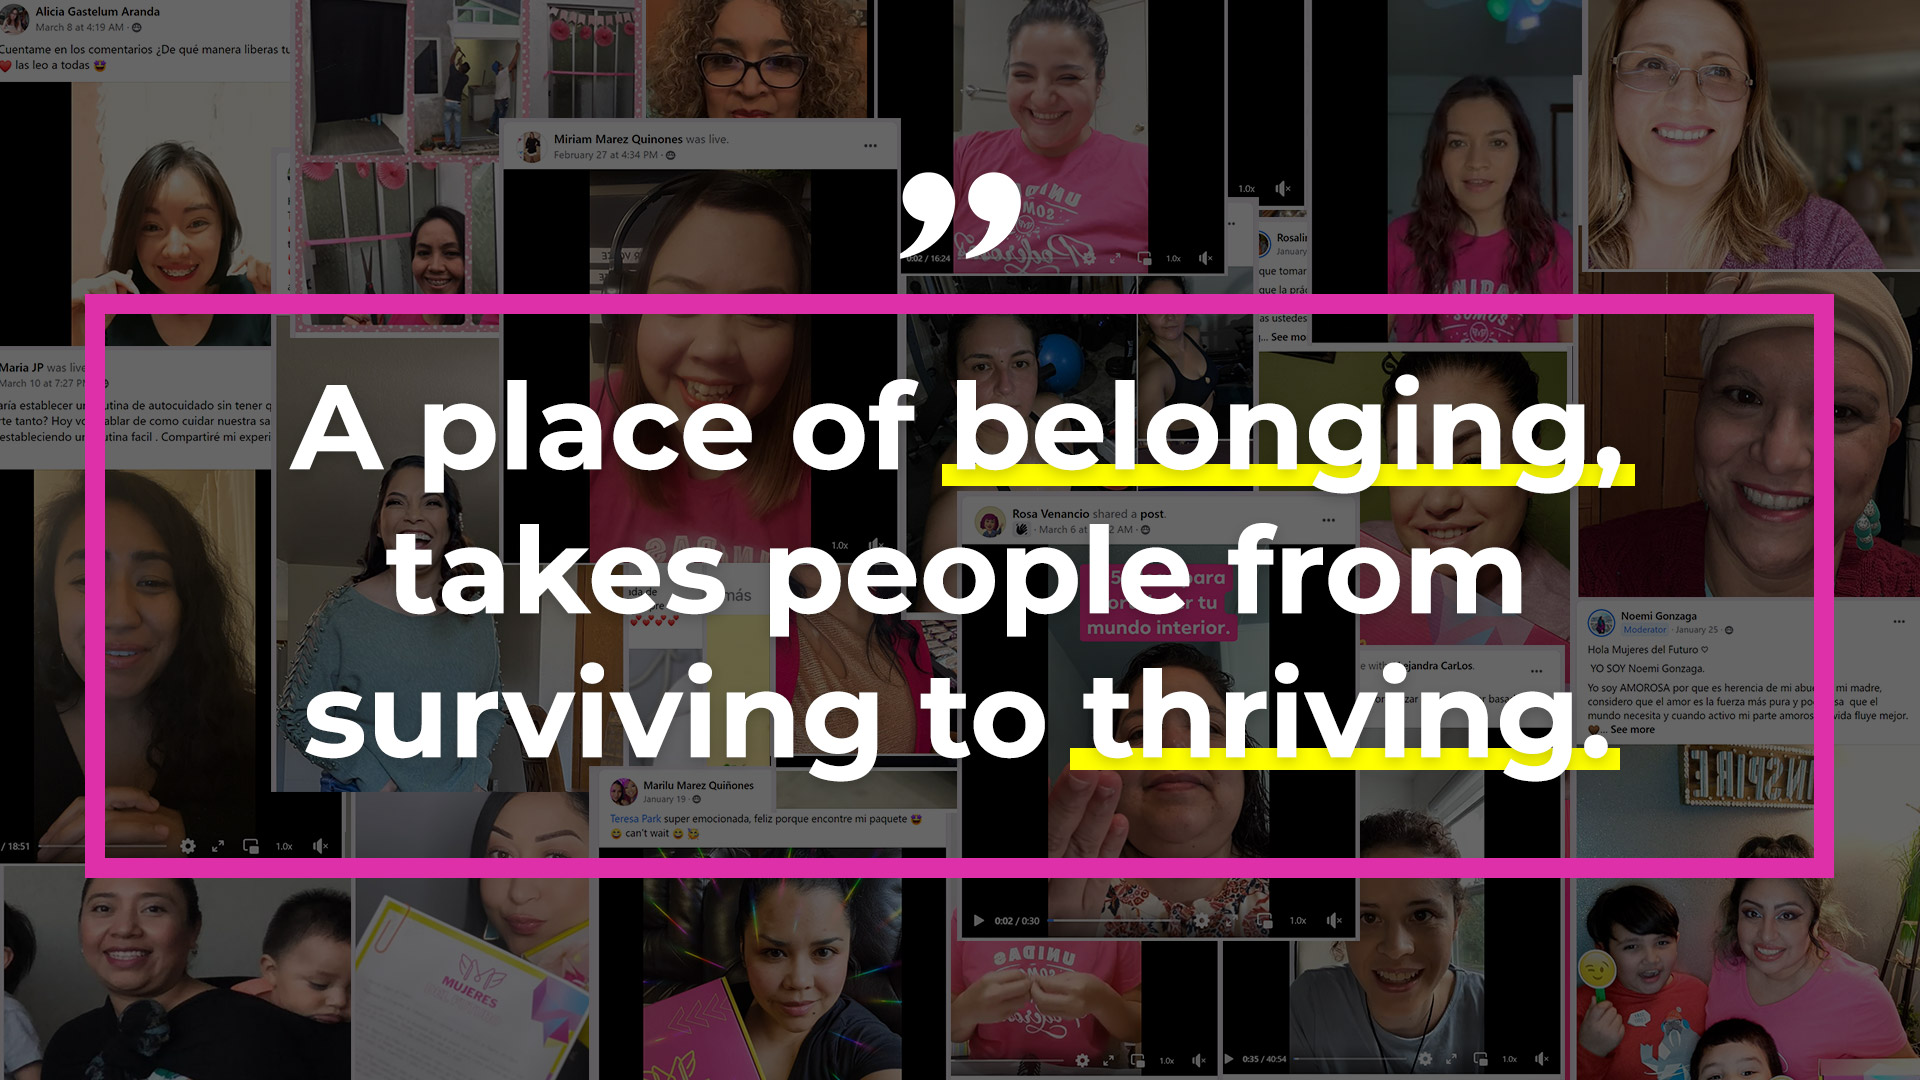 A place of belonging takes people from surviving to thriving.